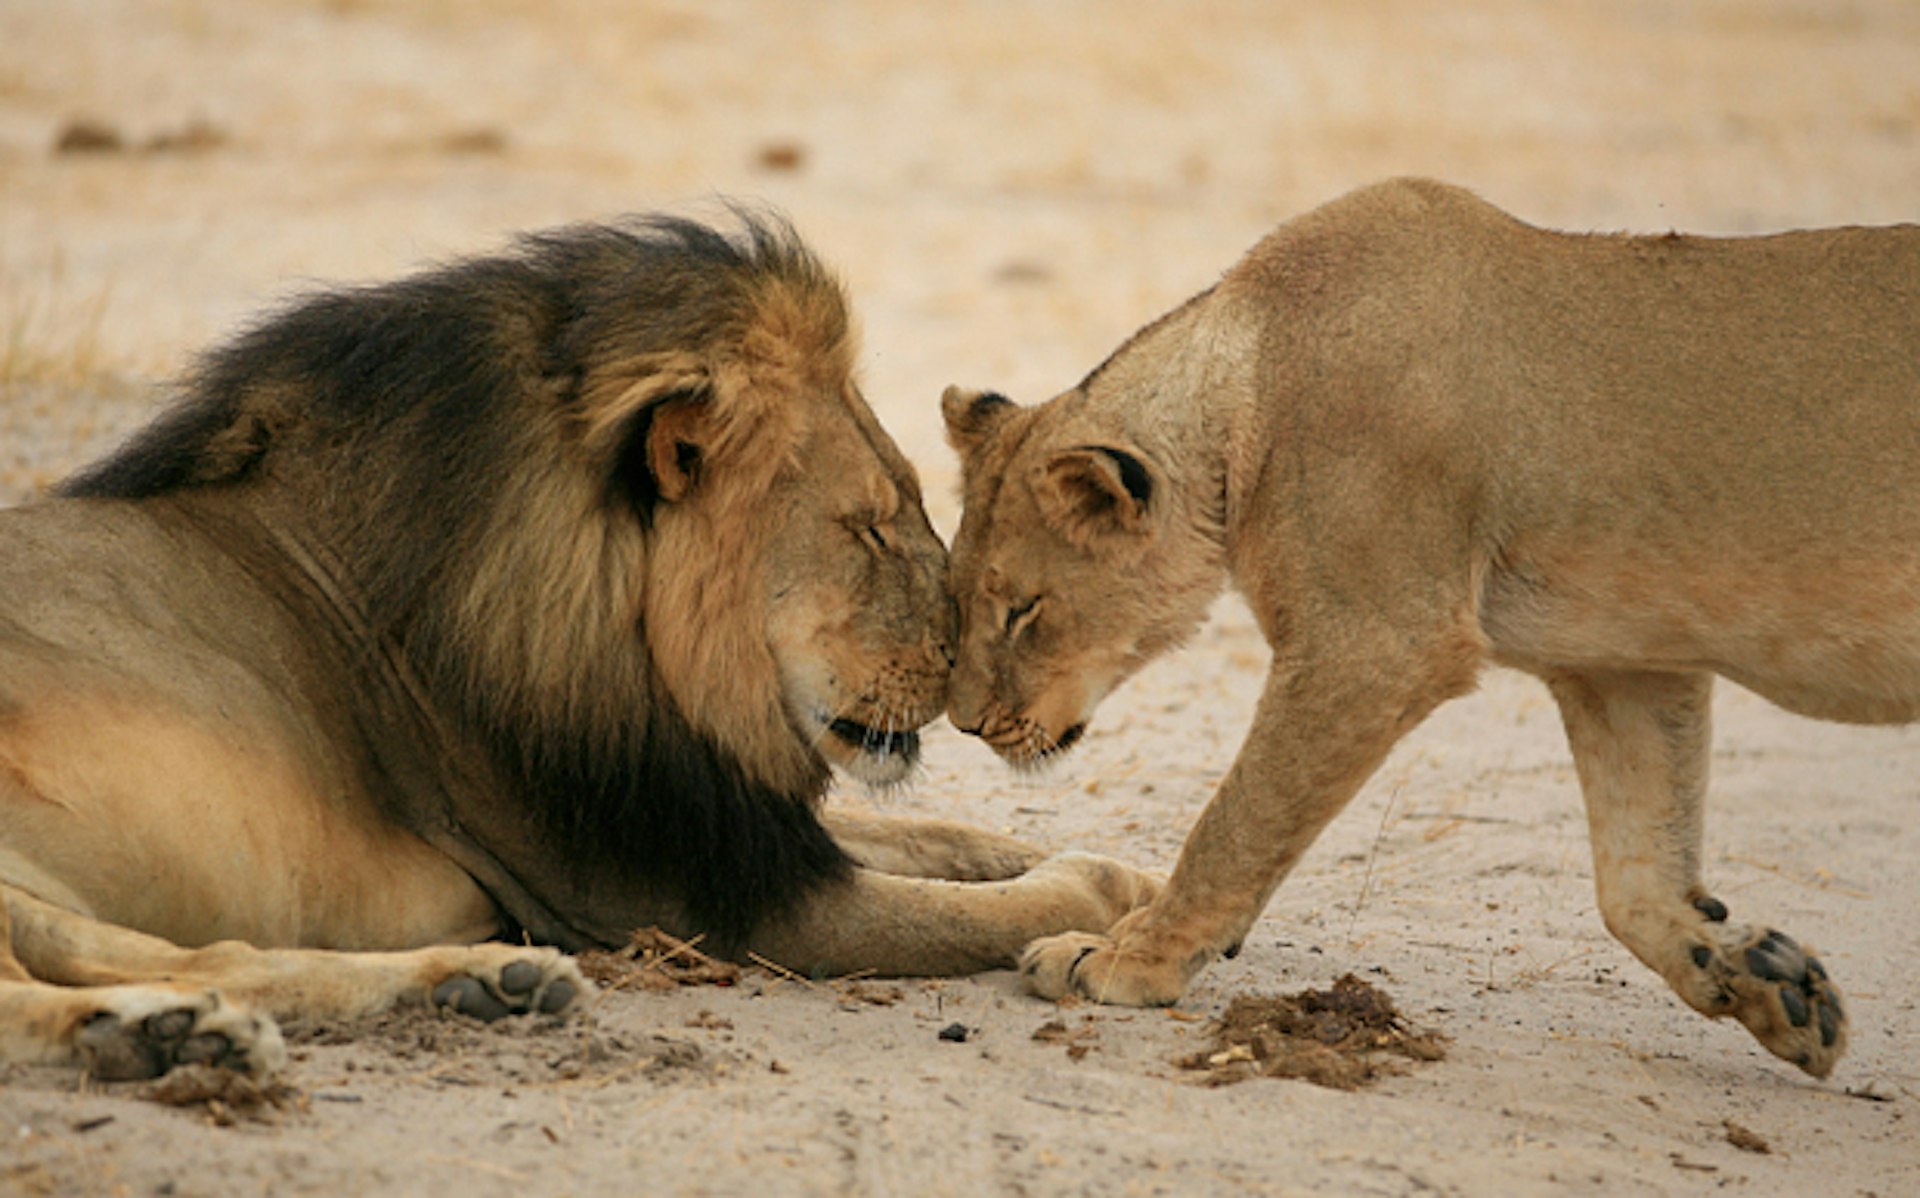 Surprising reactions from around the world to the killing of Cecil the Lion in Zimbabwe